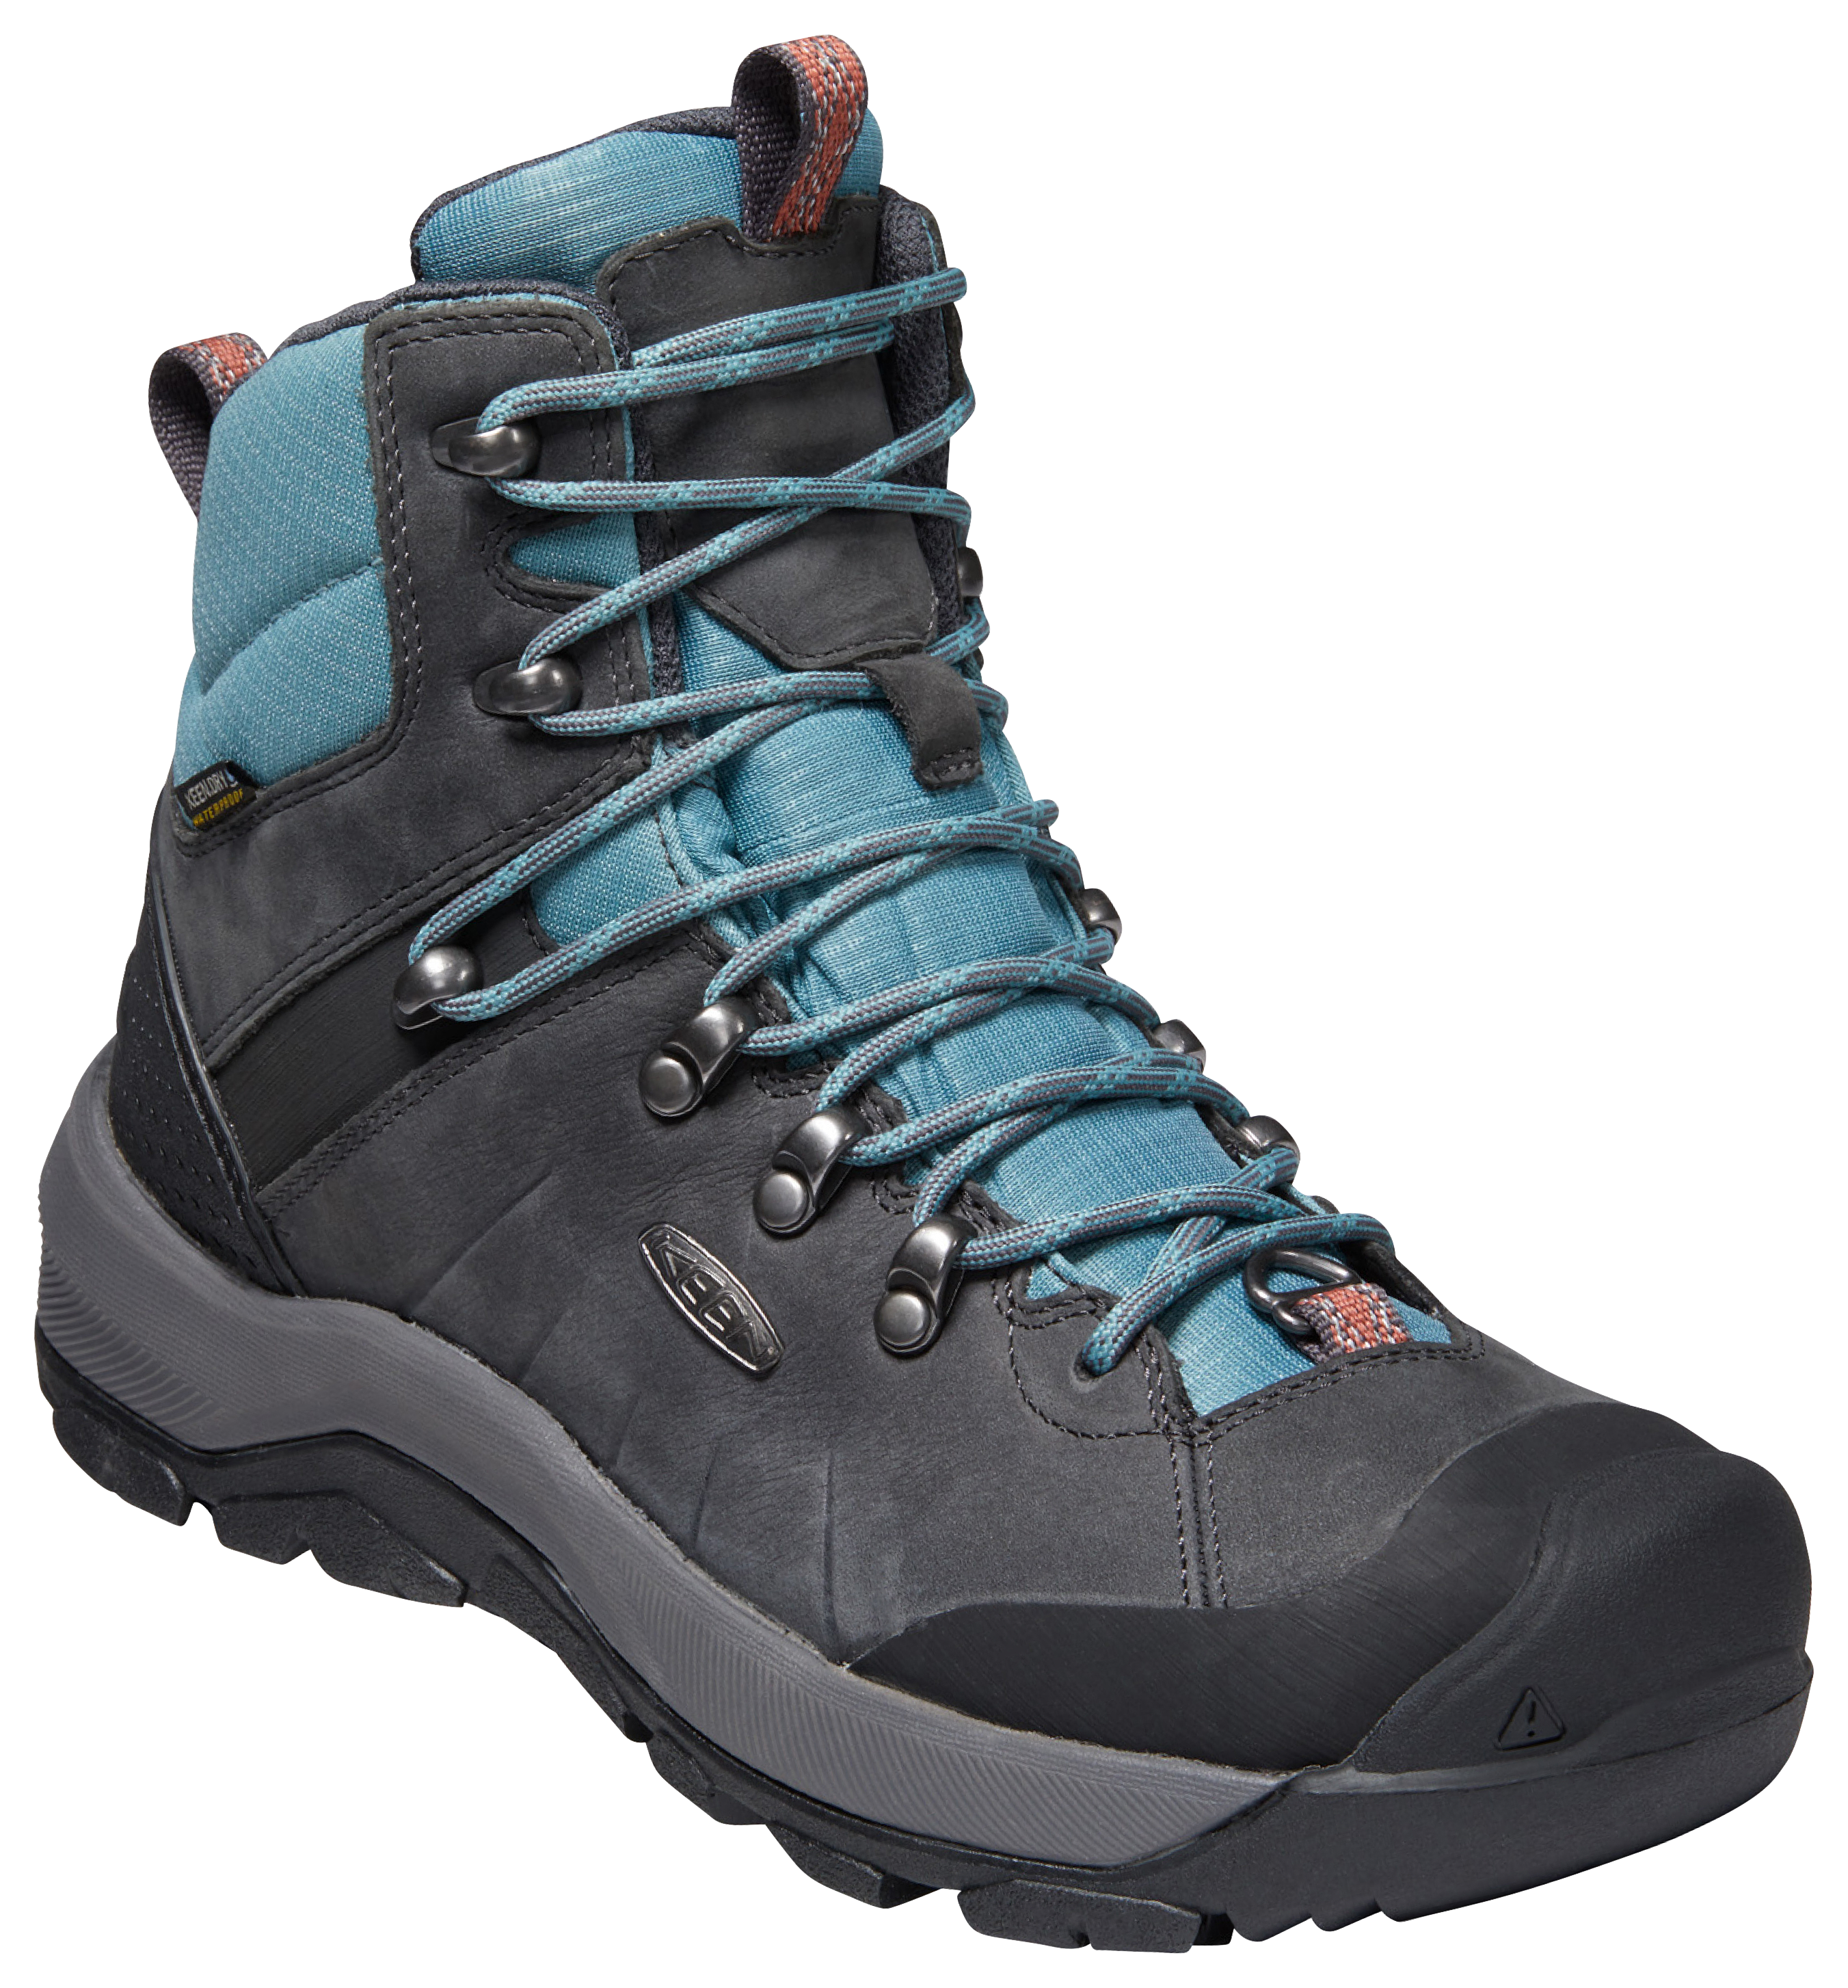 KEEN Revel IV Polar Insulated Waterproof Hiking Boots for Ladies - Magnet/North Atlantic - 10.5M